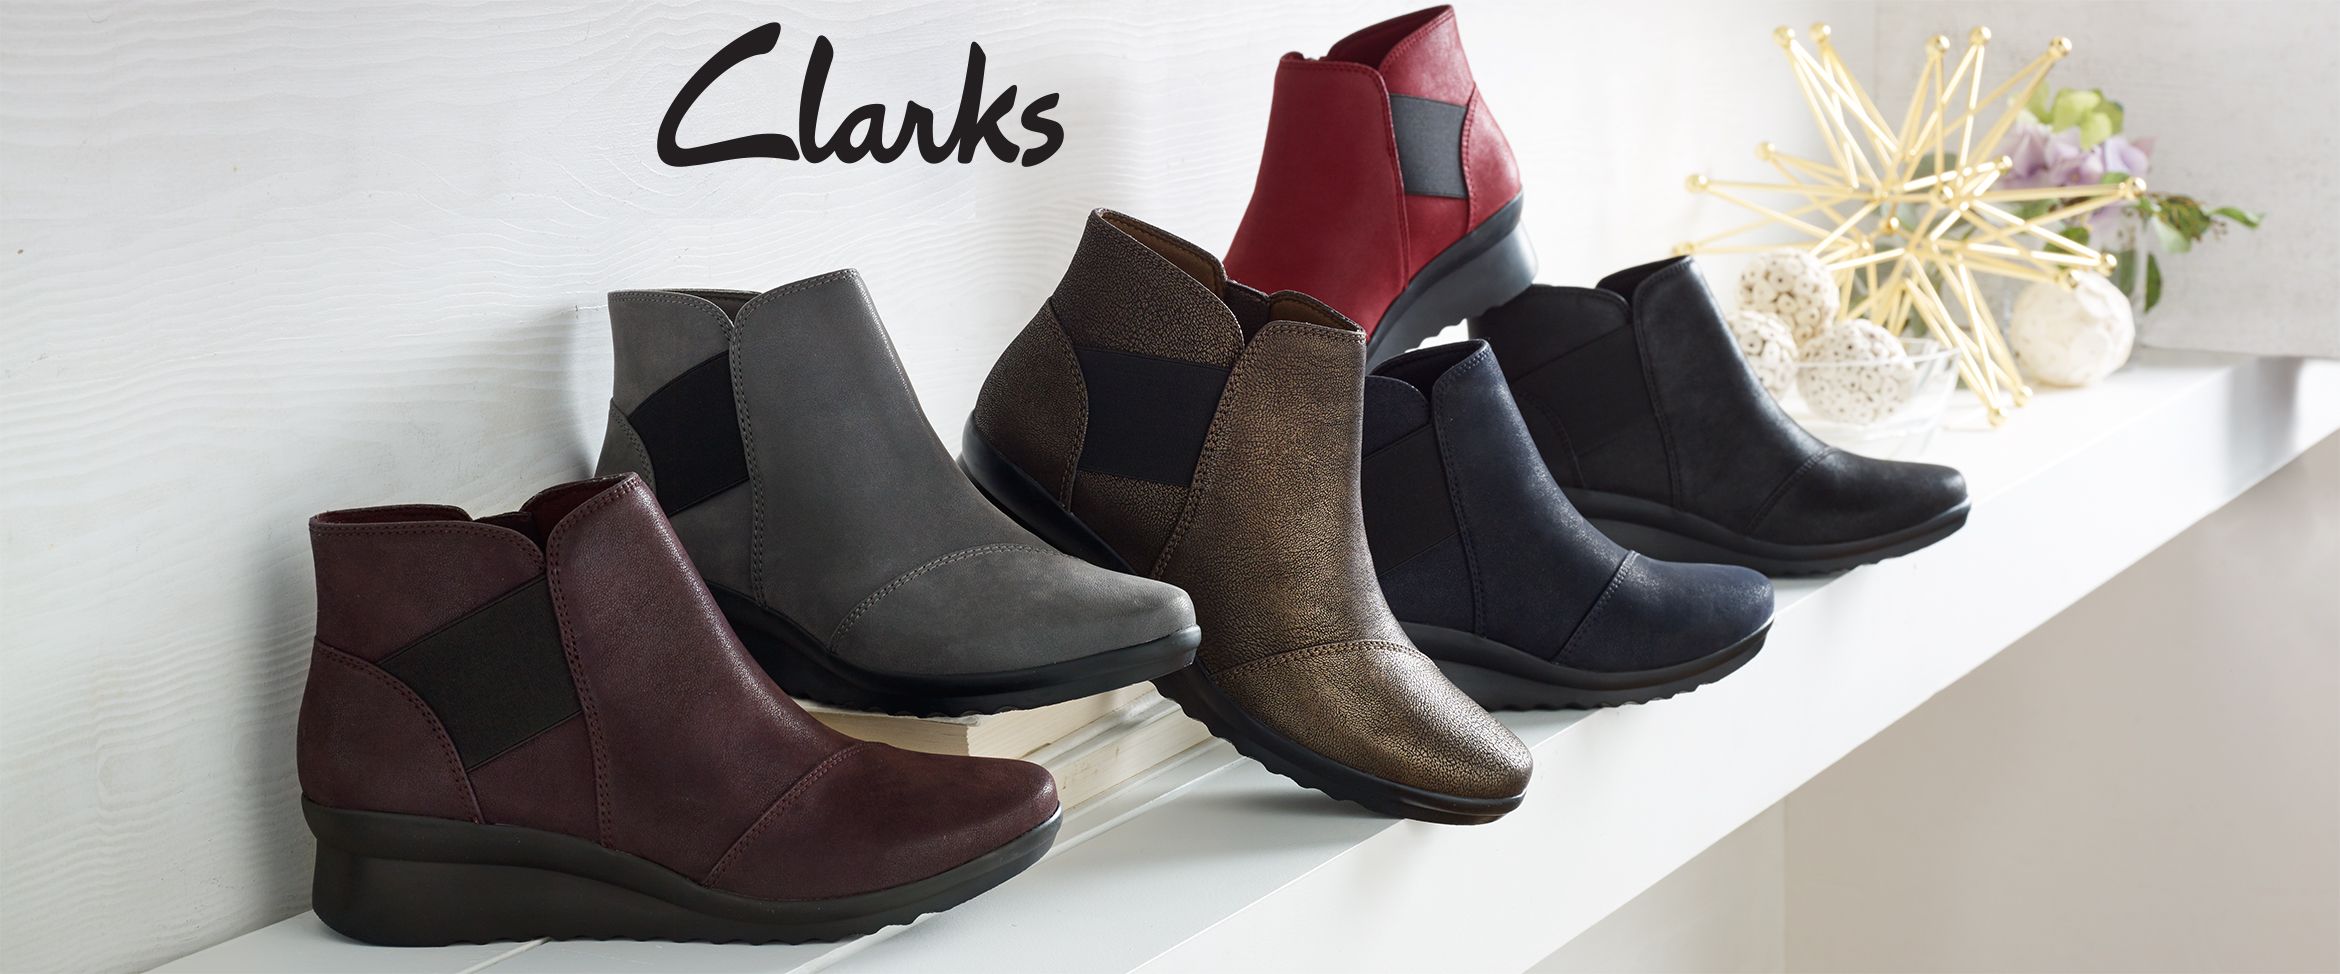 cloudsteppers clarks boots